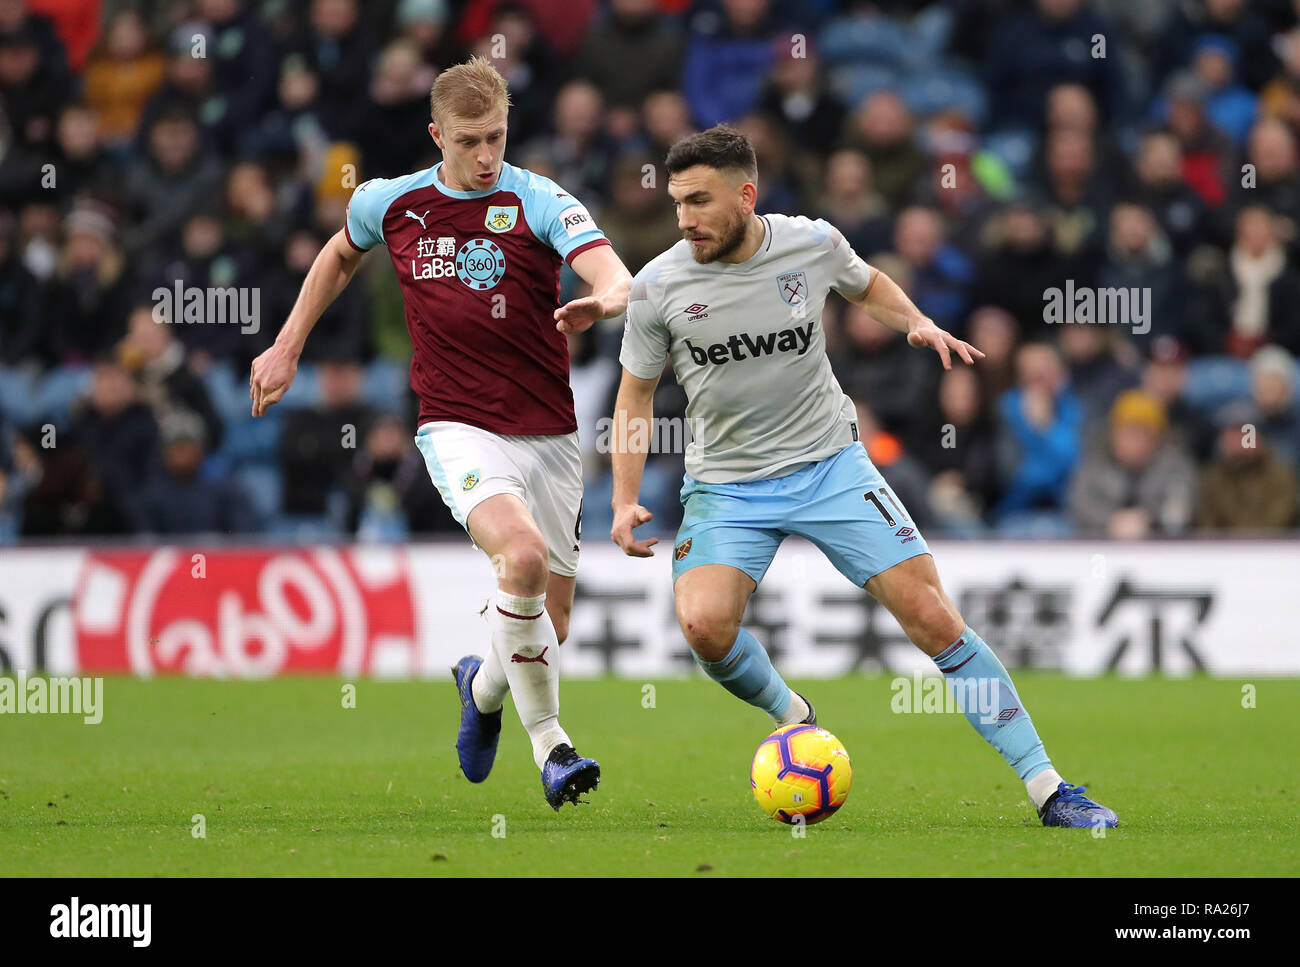 Burnley's Ben Mee (left) and West Ham United's Robert Snodgrass battle for the ball during the Premier League match at Turf Moor, Burnley. Stock Photo